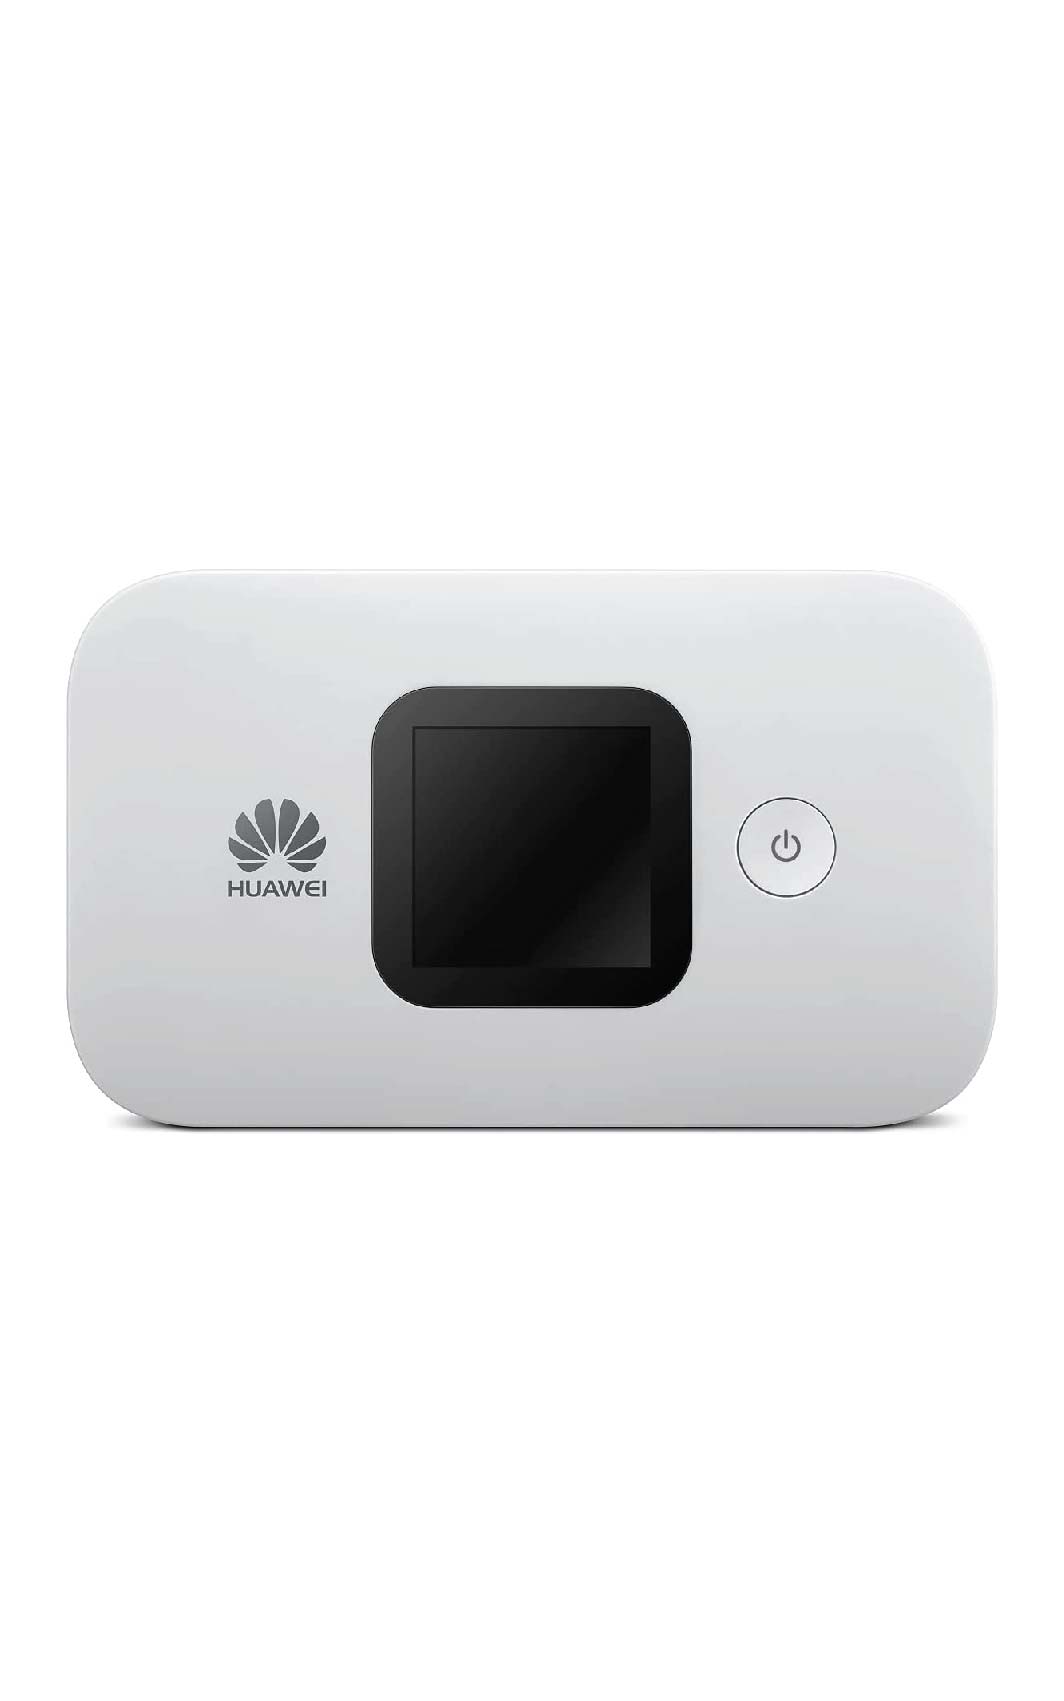 Huawei Mobile WIFI (Unboxed)